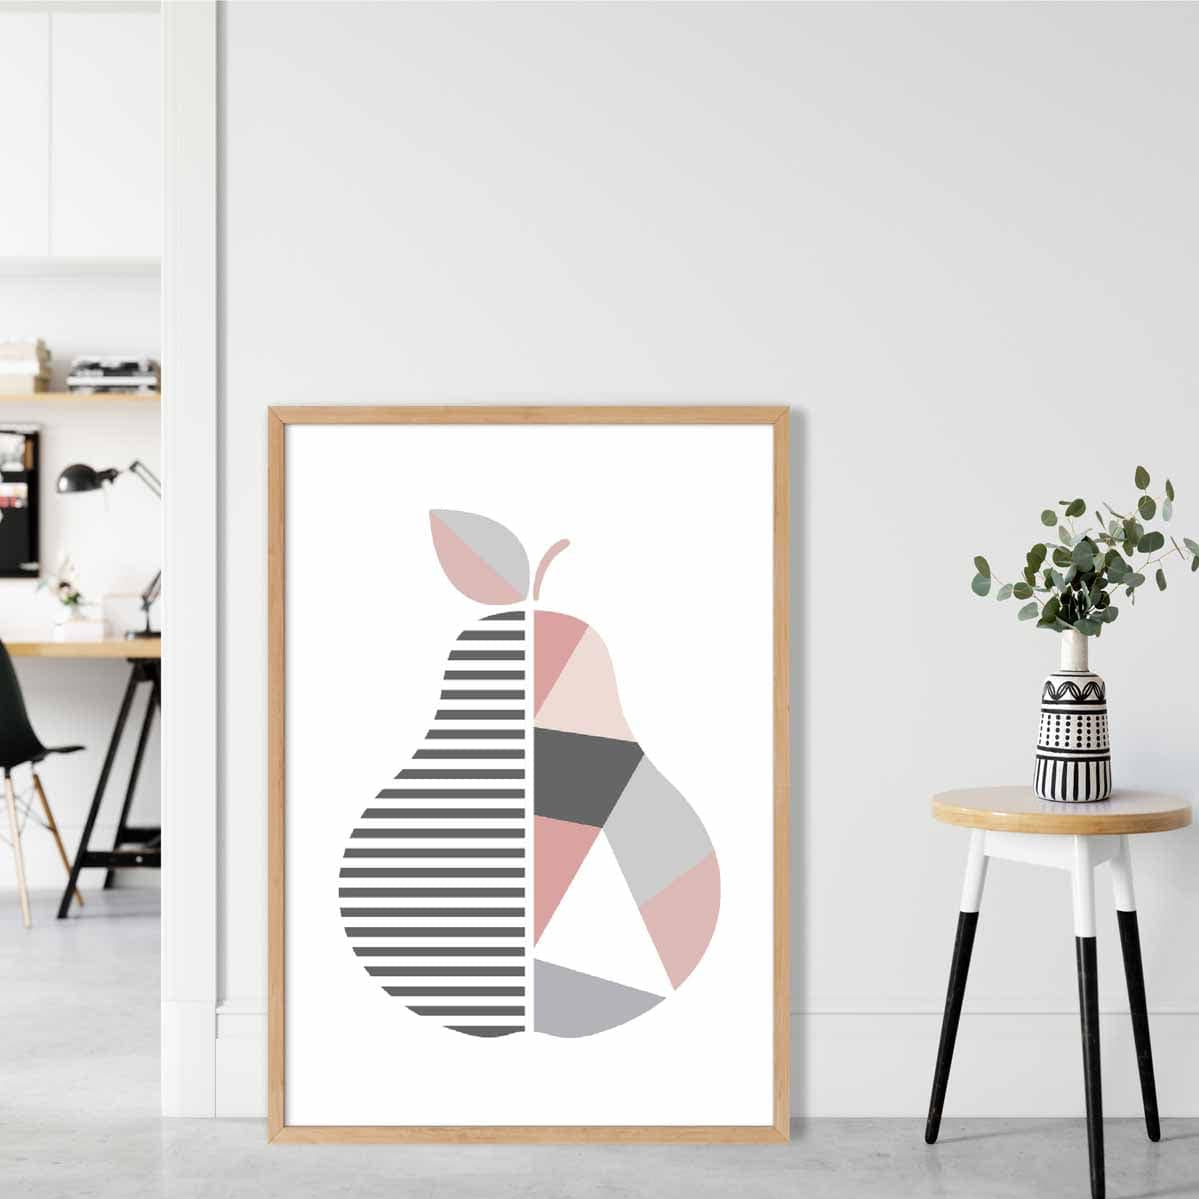 Geometric Fruit Poster of a Pear in Blush Pink and Grey